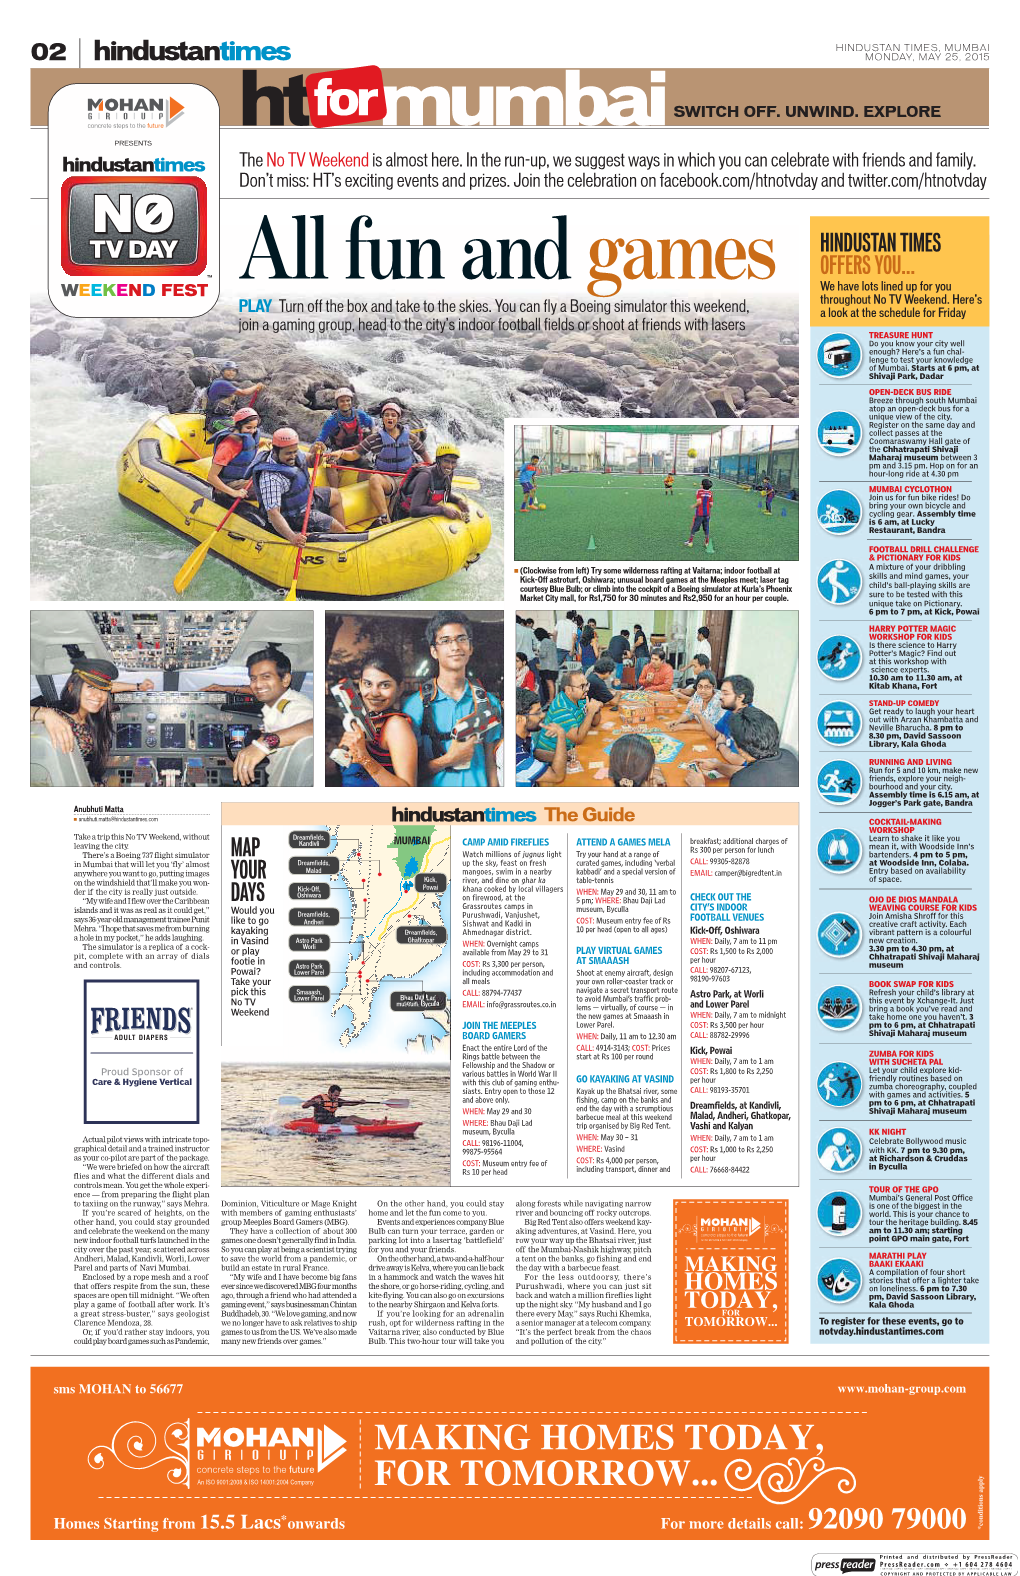 Map Your Days Hindustan Times Offers You